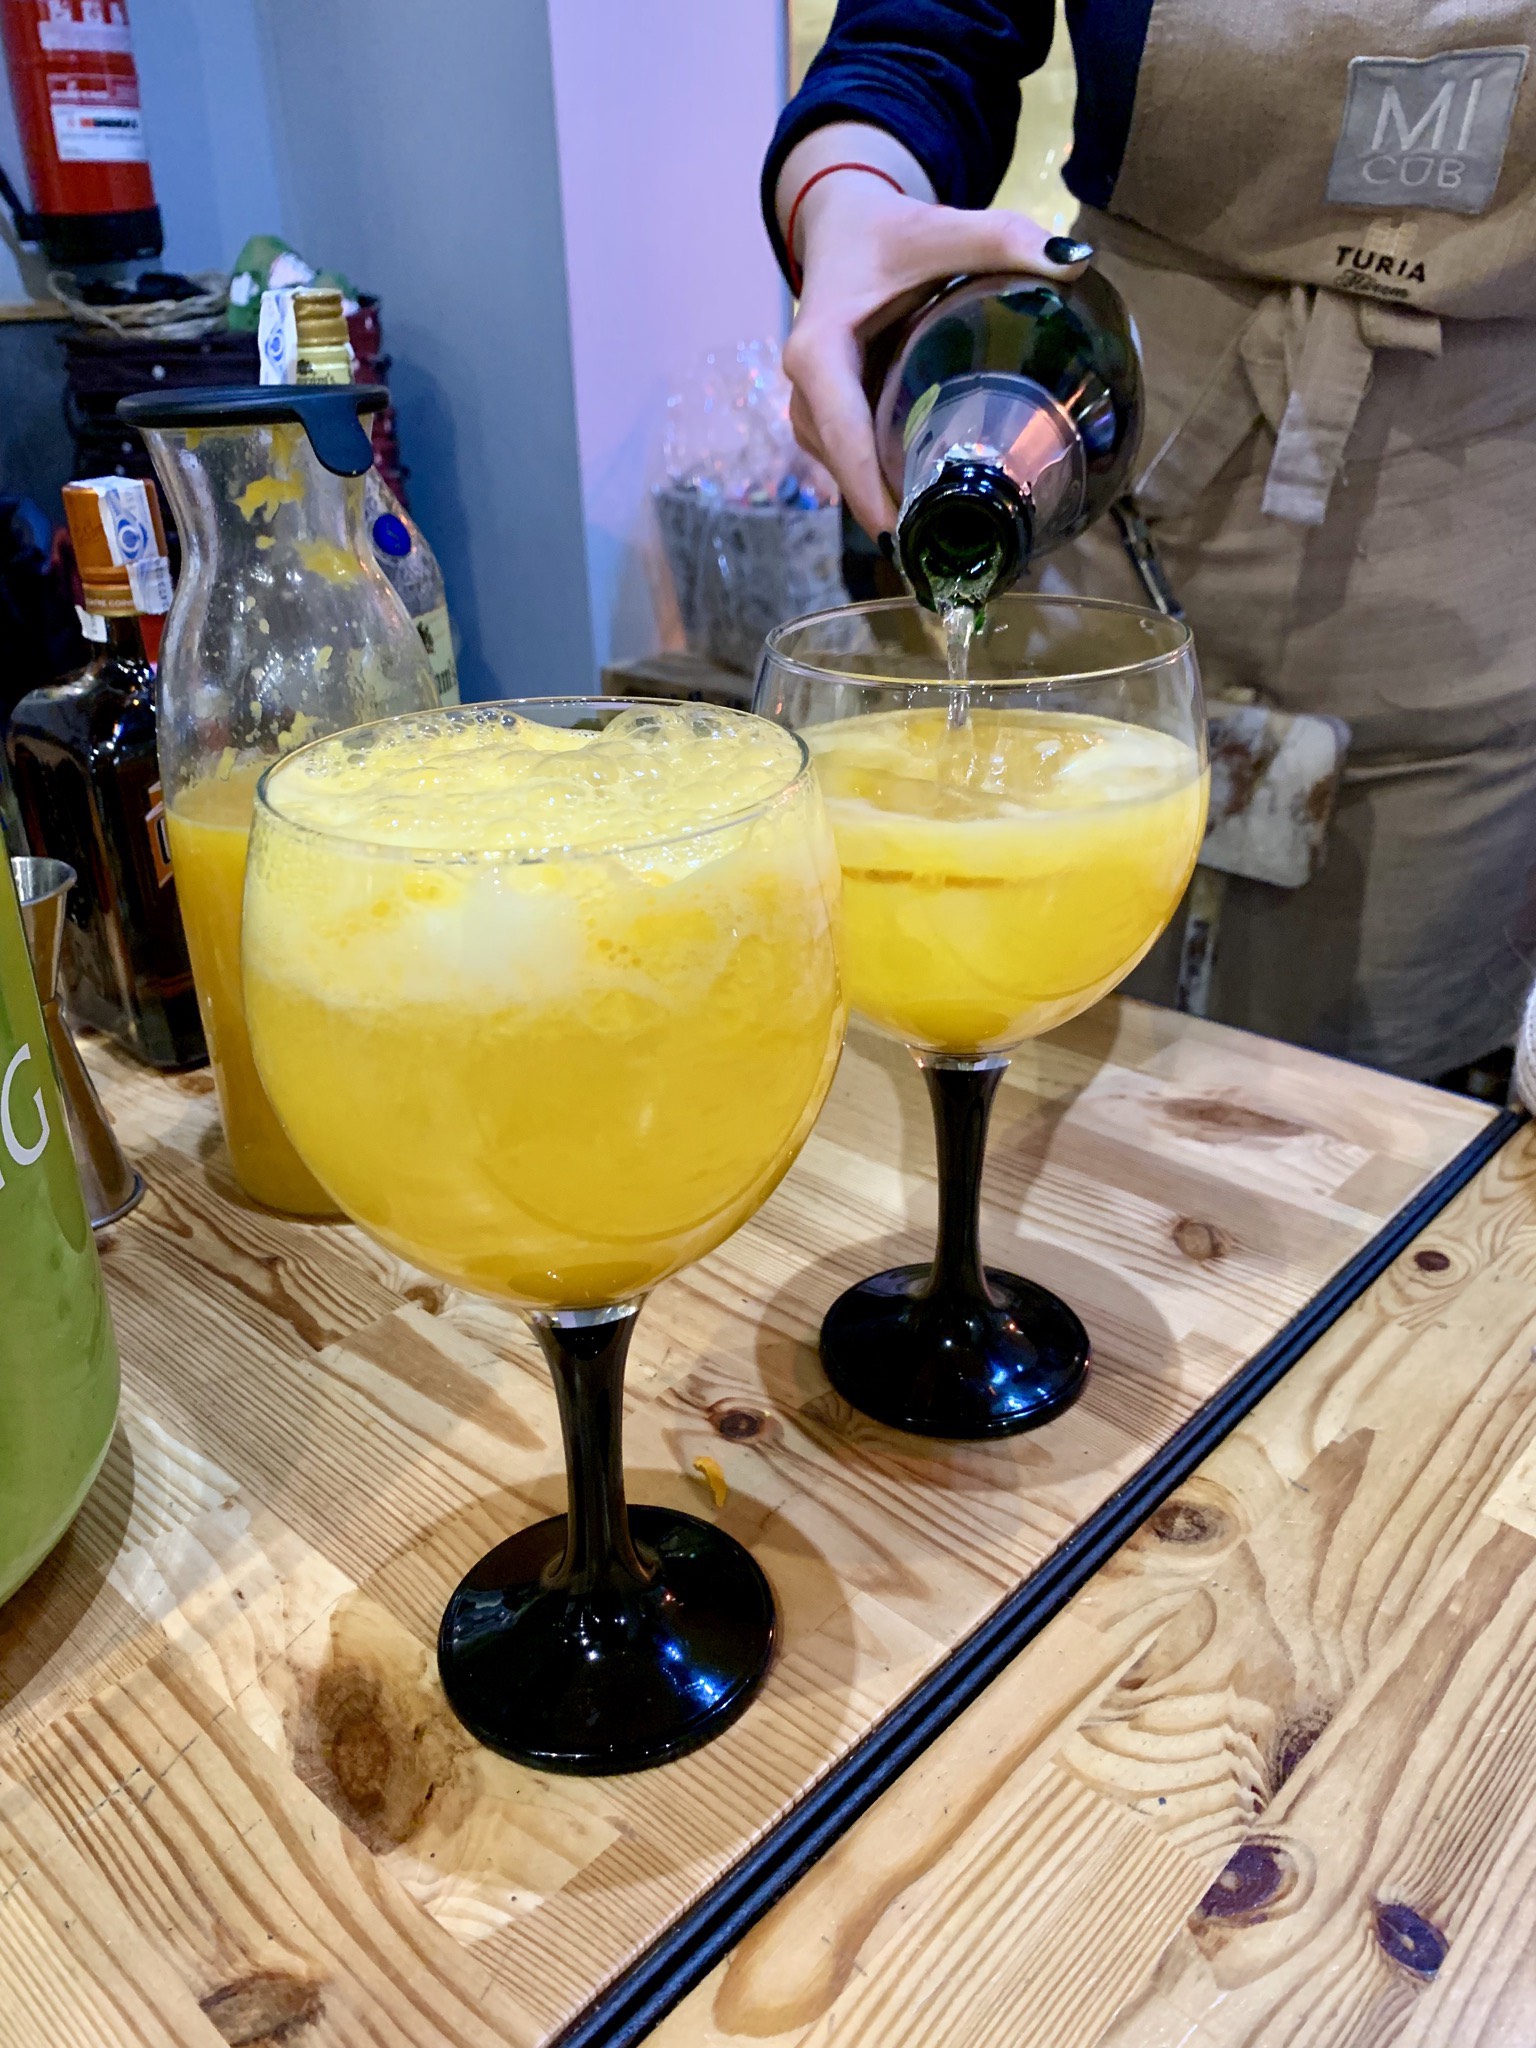 Agua de Valencia is an alcoholic drink made with orange juice, cava, and other liquors